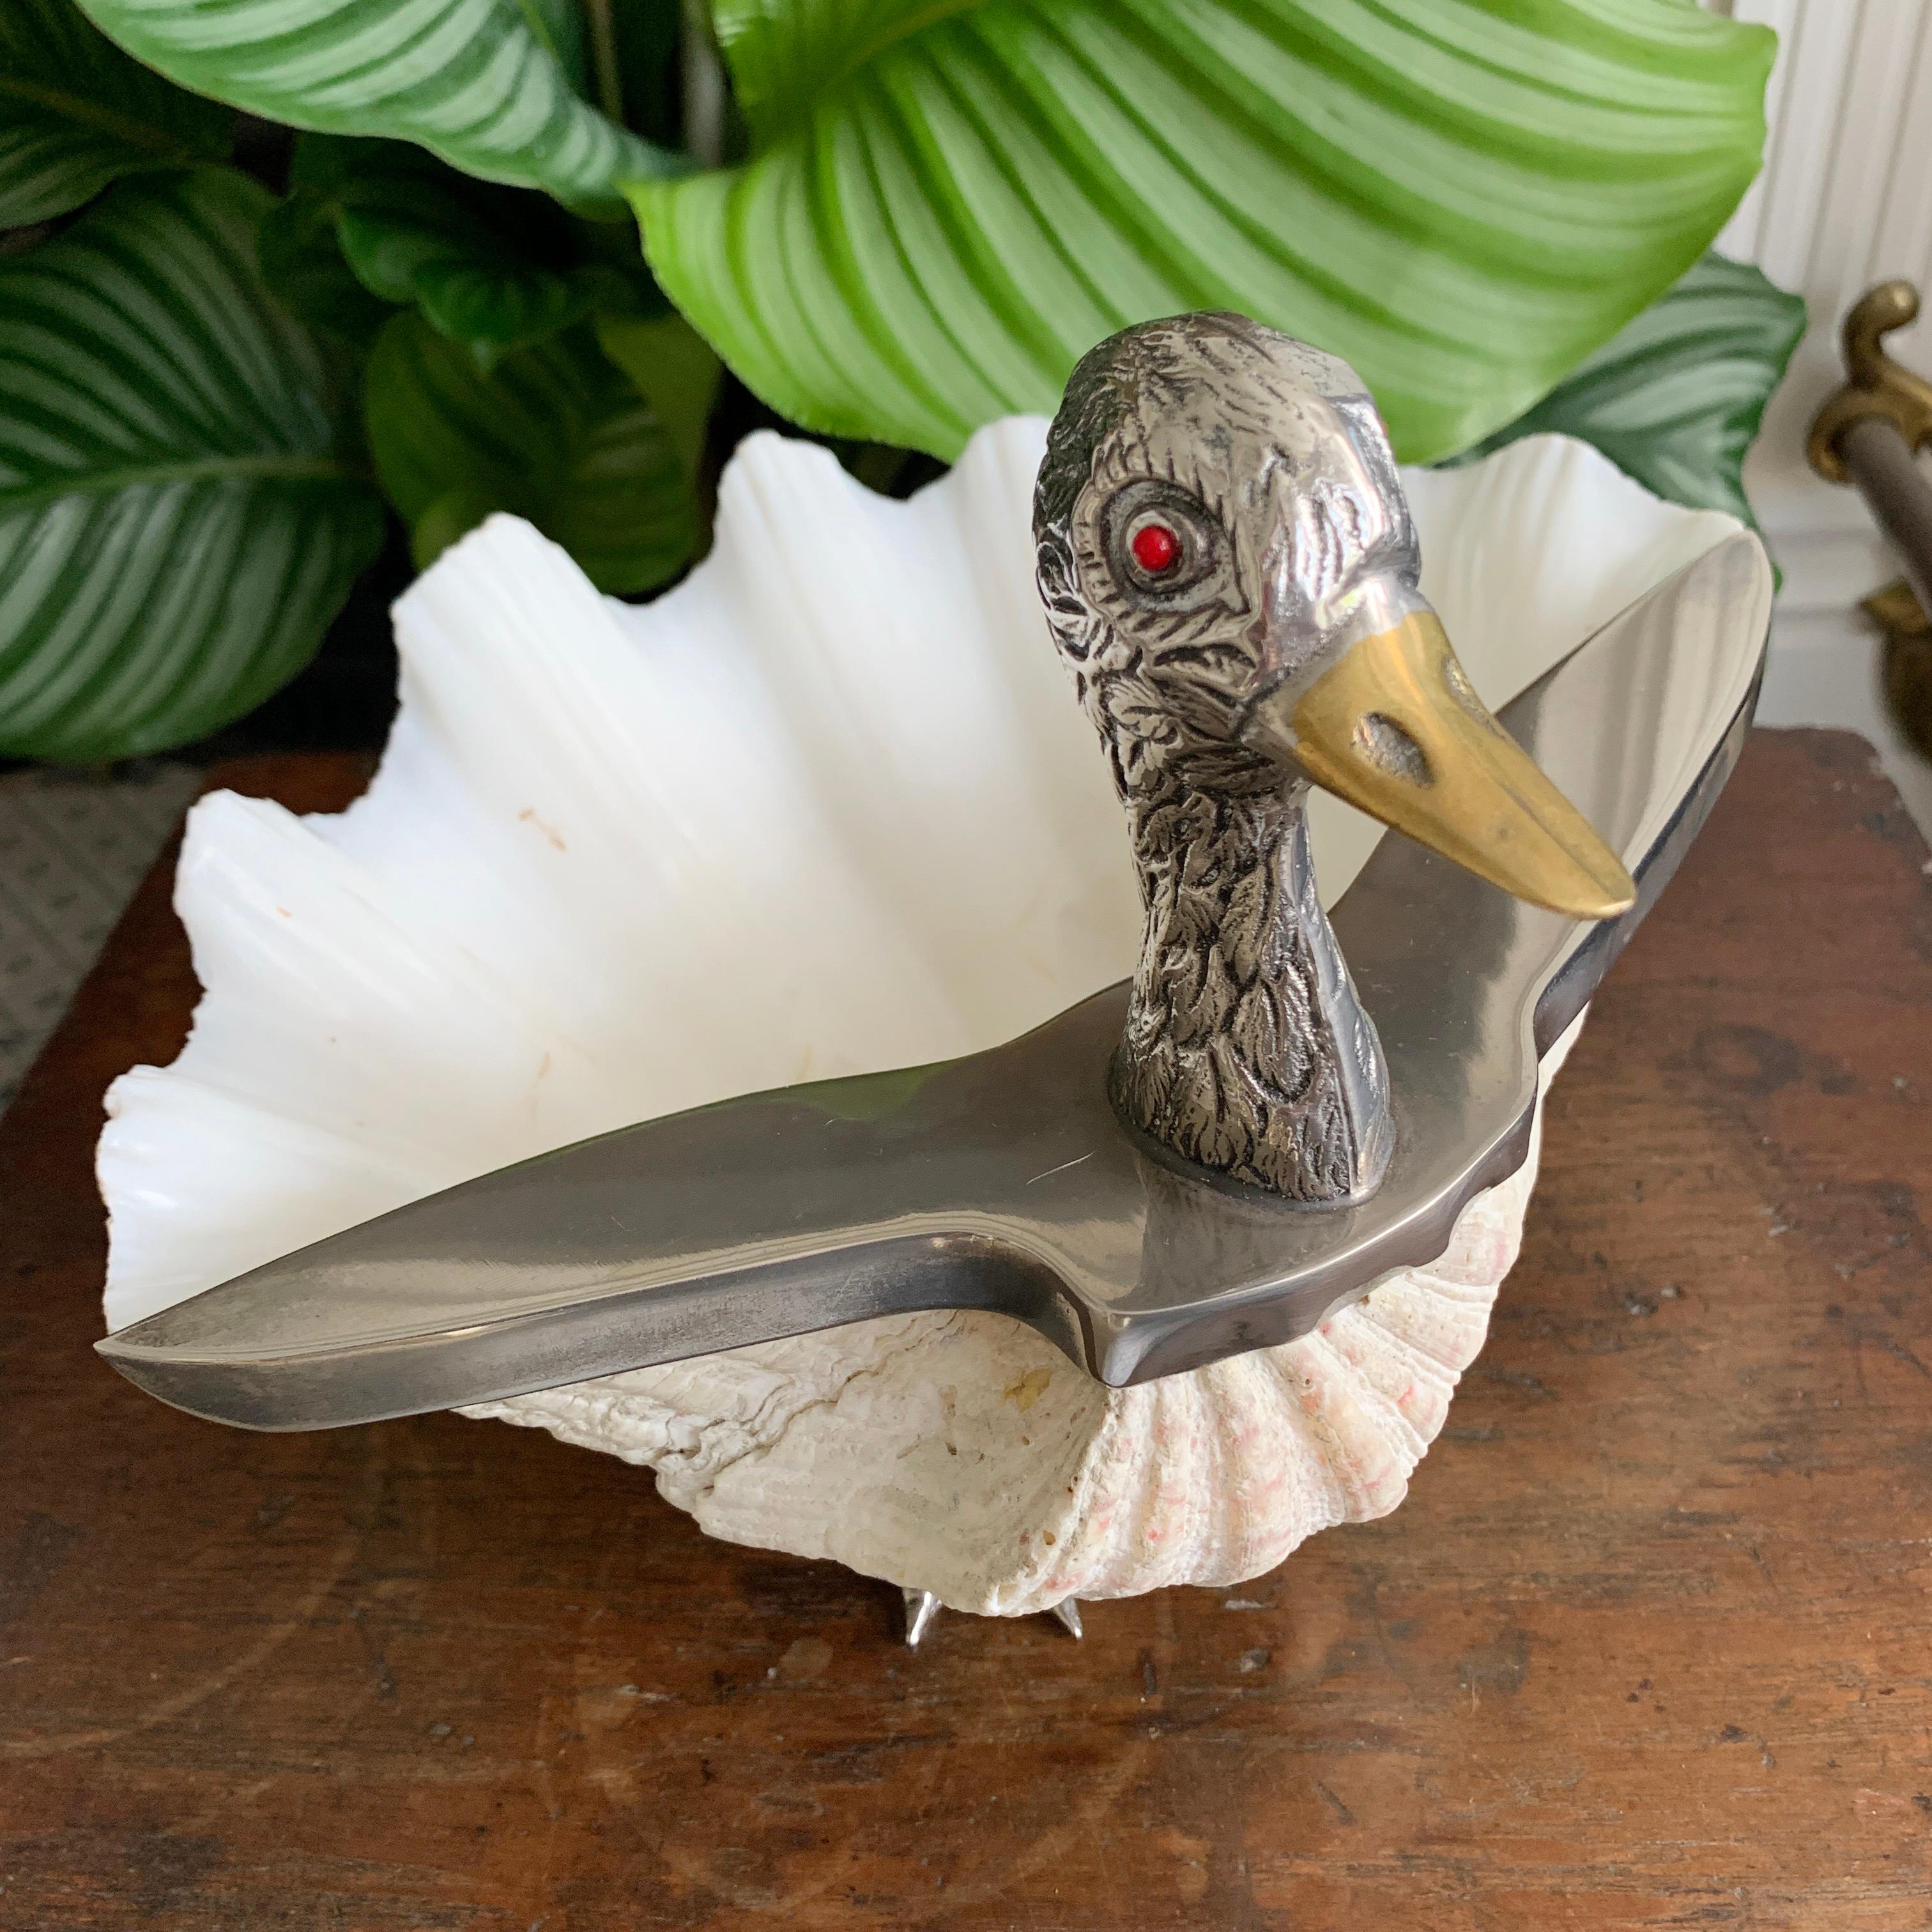 This beautiful clam shell duck designed and made by Gabriella Binazzi, Italy circa 1970s. The natural shell is mounted on a silver plated pair of feet and decorated with a fantastical silver plated duck head and shoulders. Signed and stamped near